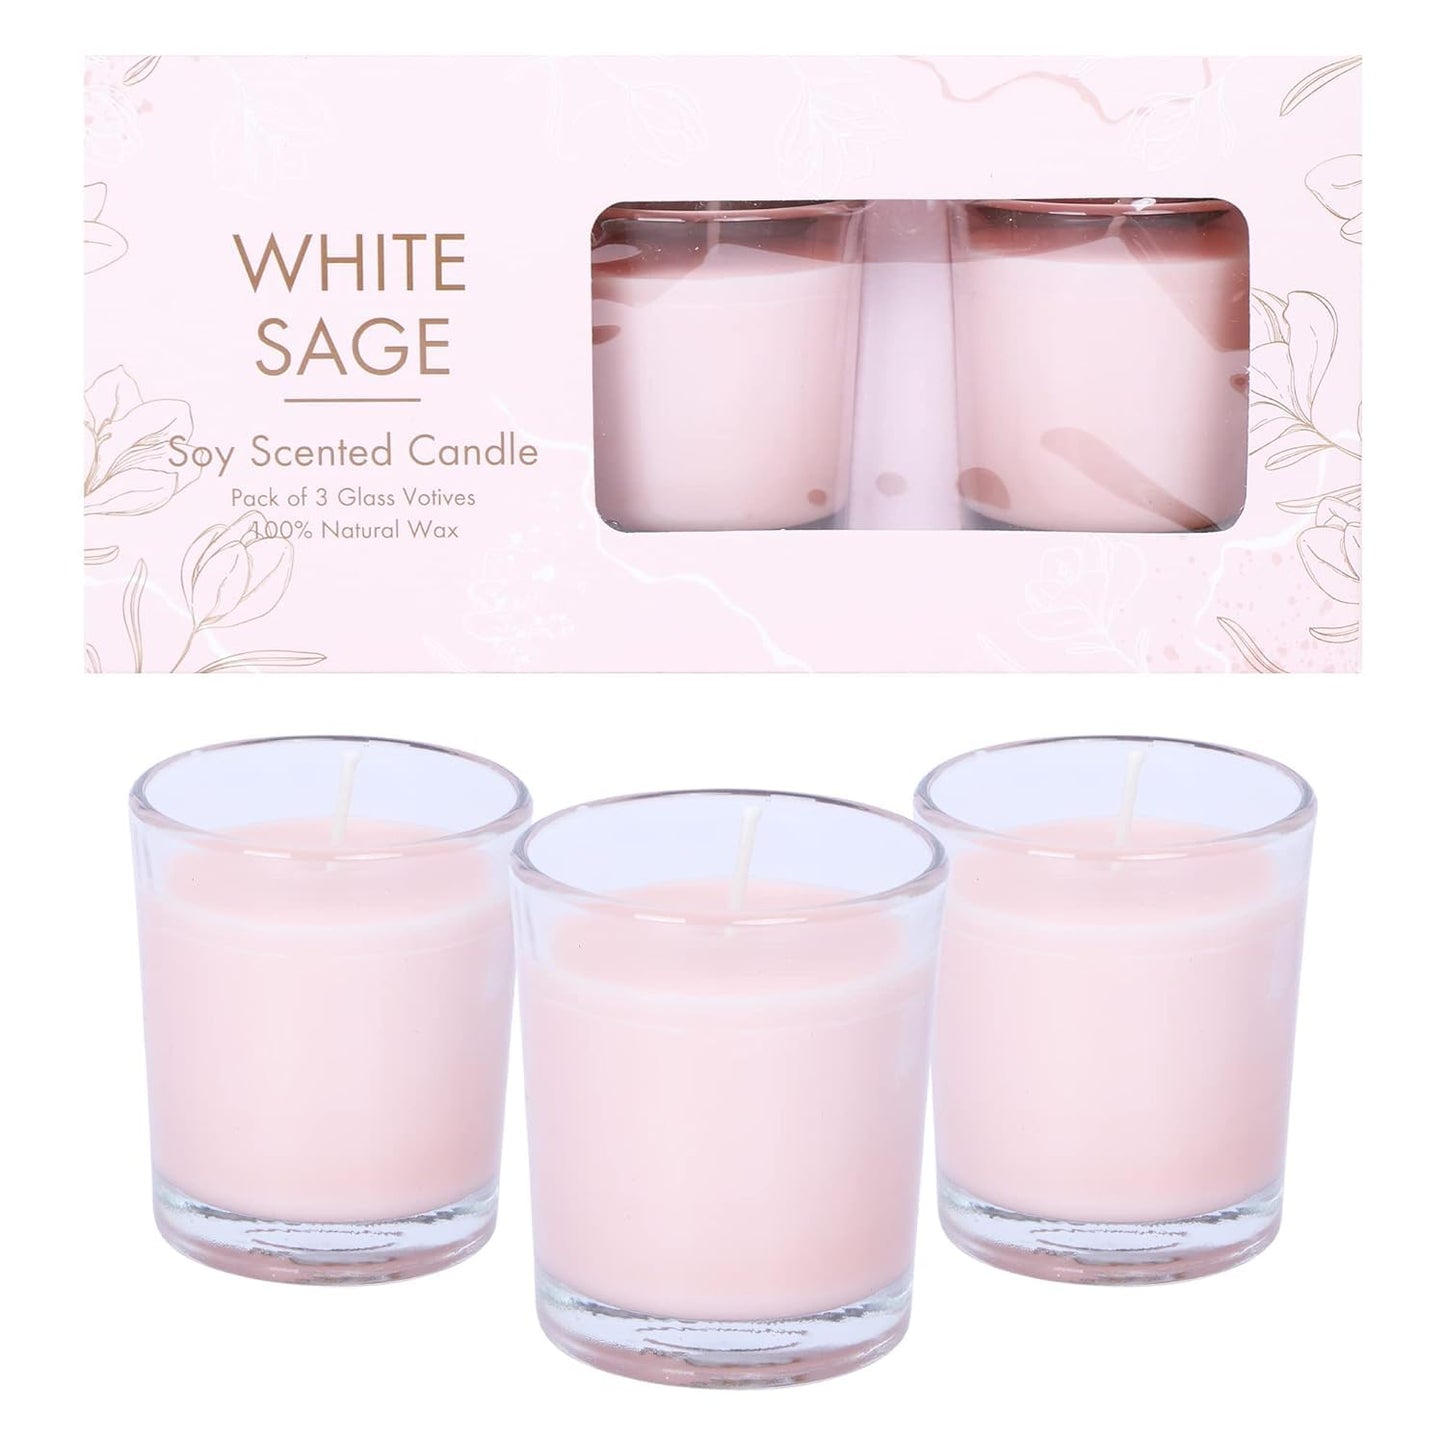 Pujahome Candles Scented Votive Glass Candles Set of 3, 100% Natural Soy Wax (White SAGE)